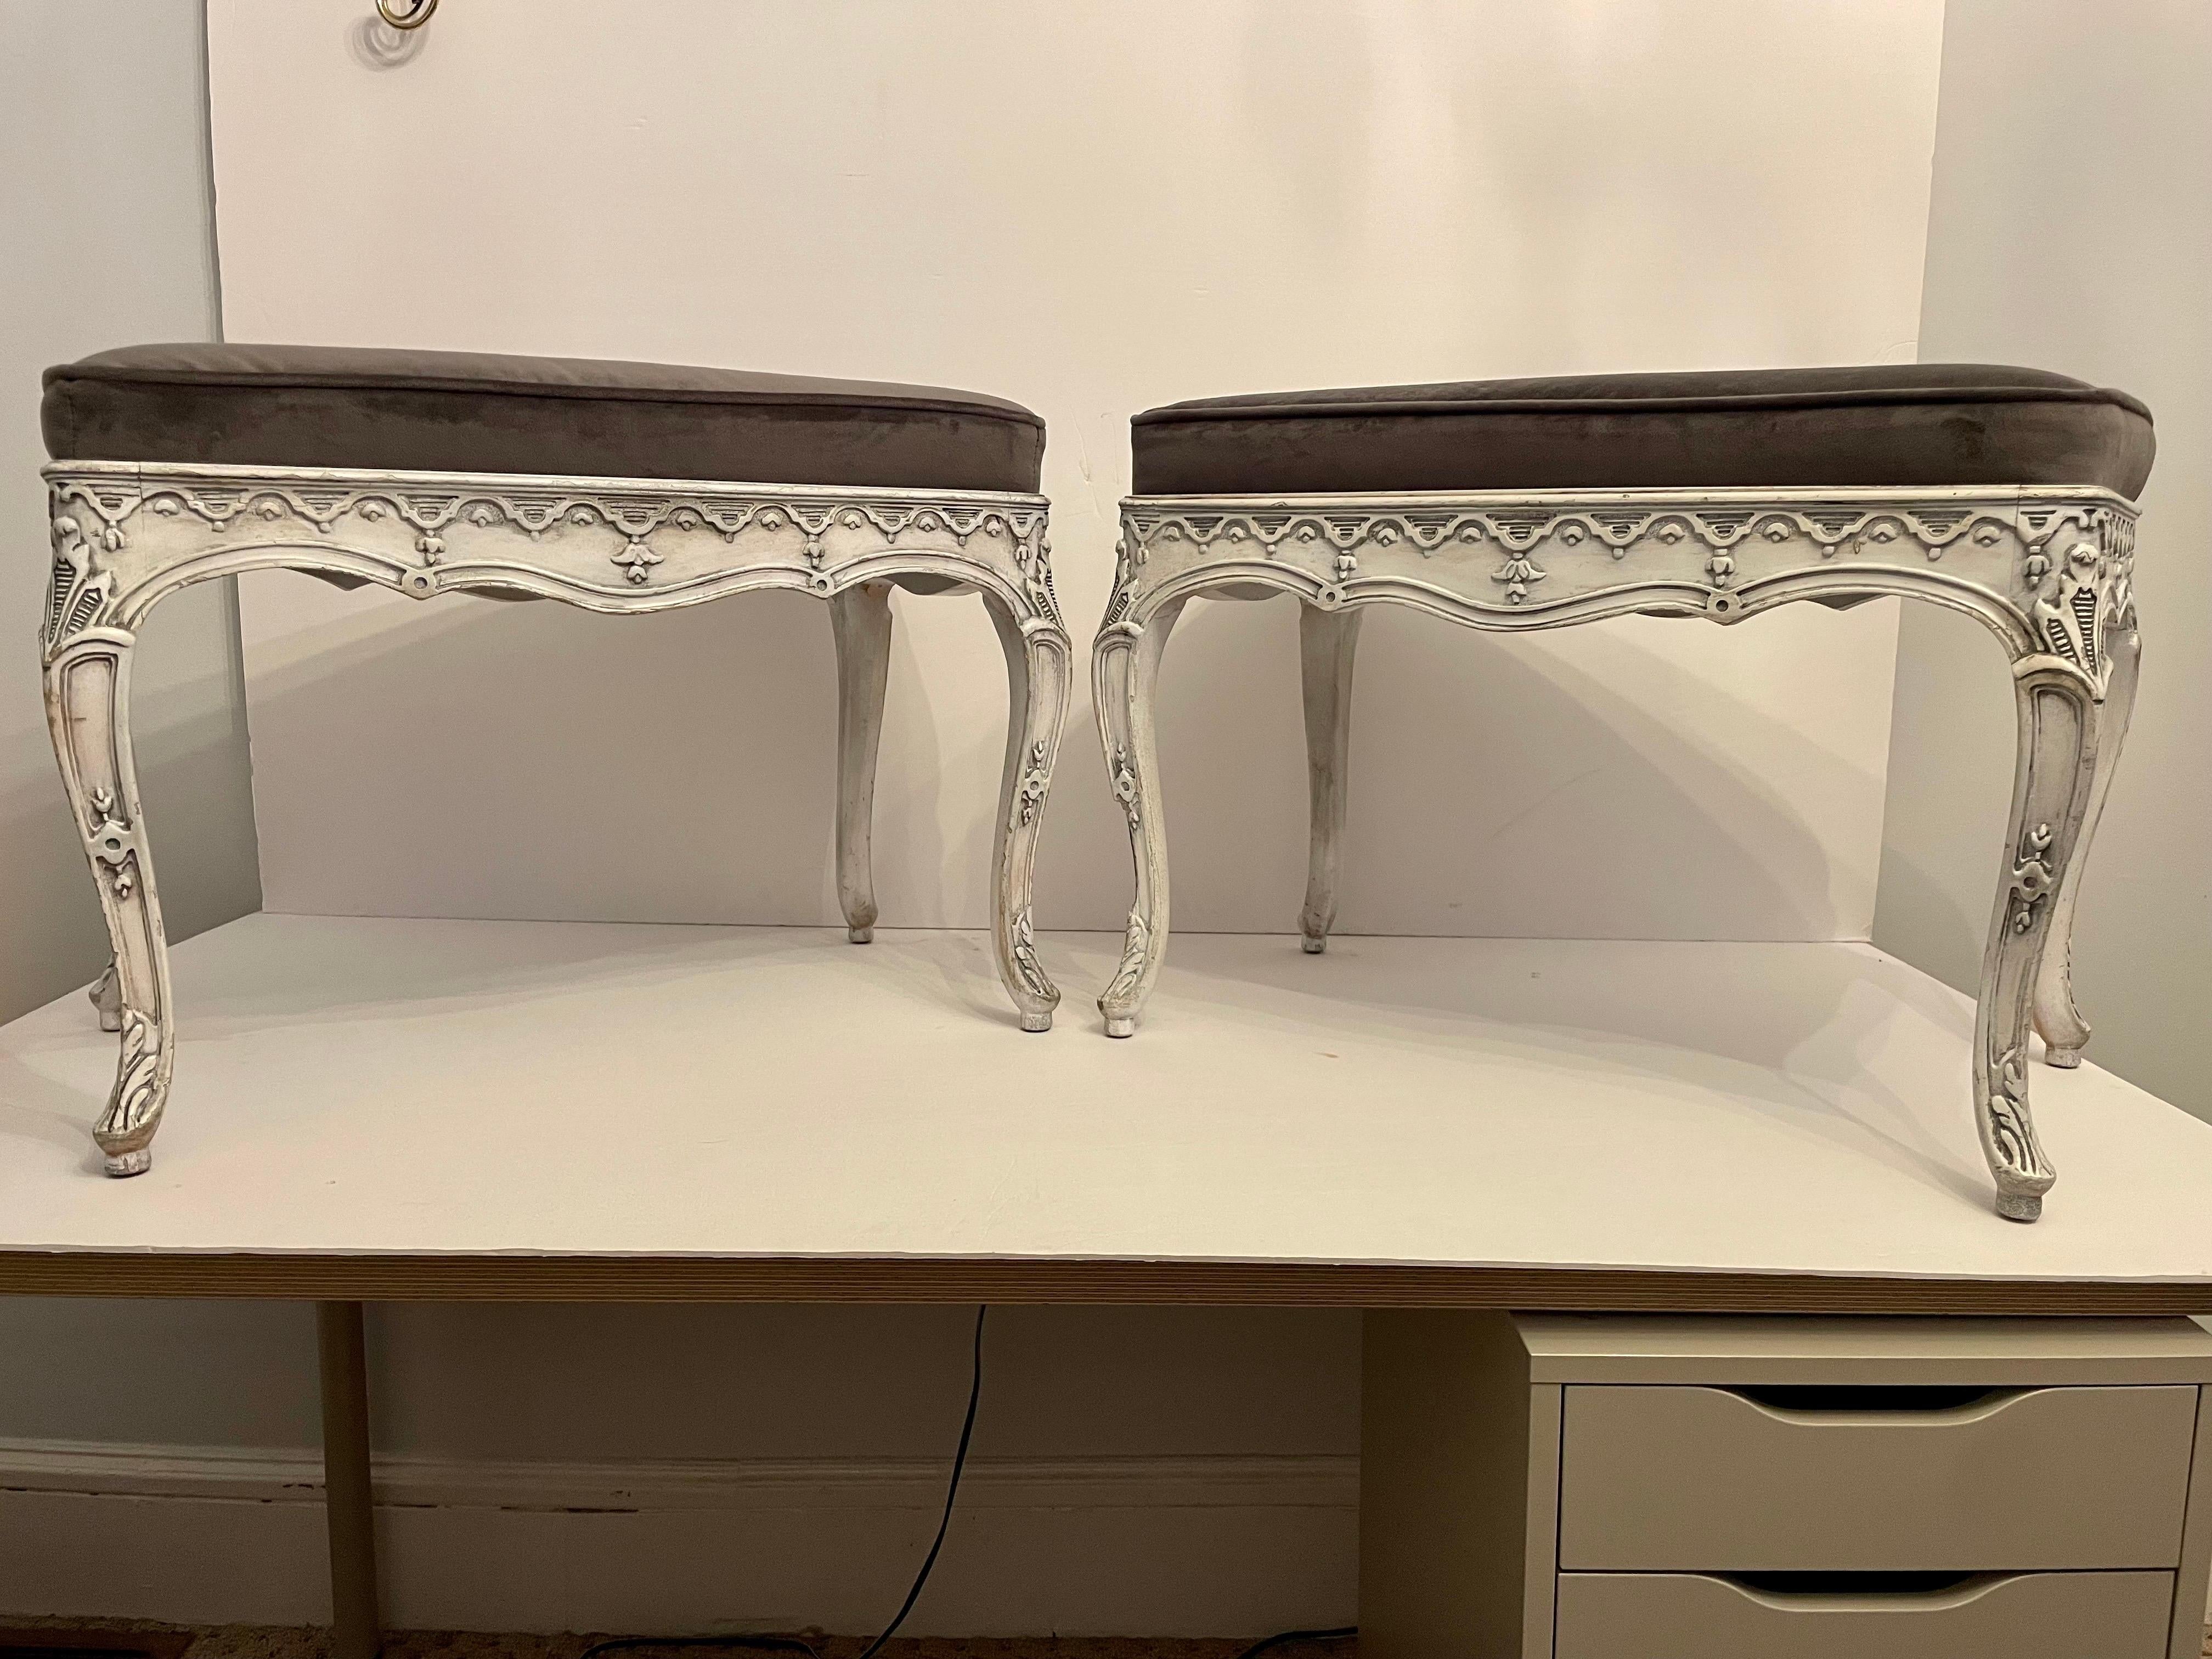 Pair Of Italian Painted Benches. Newly upholstered in charcoal velvet. Each measures 24.5” wide x 14.75” deep x 18.75” tall. Benches were repainted at some point. These can be professionally packed and shipped, price depends on location.